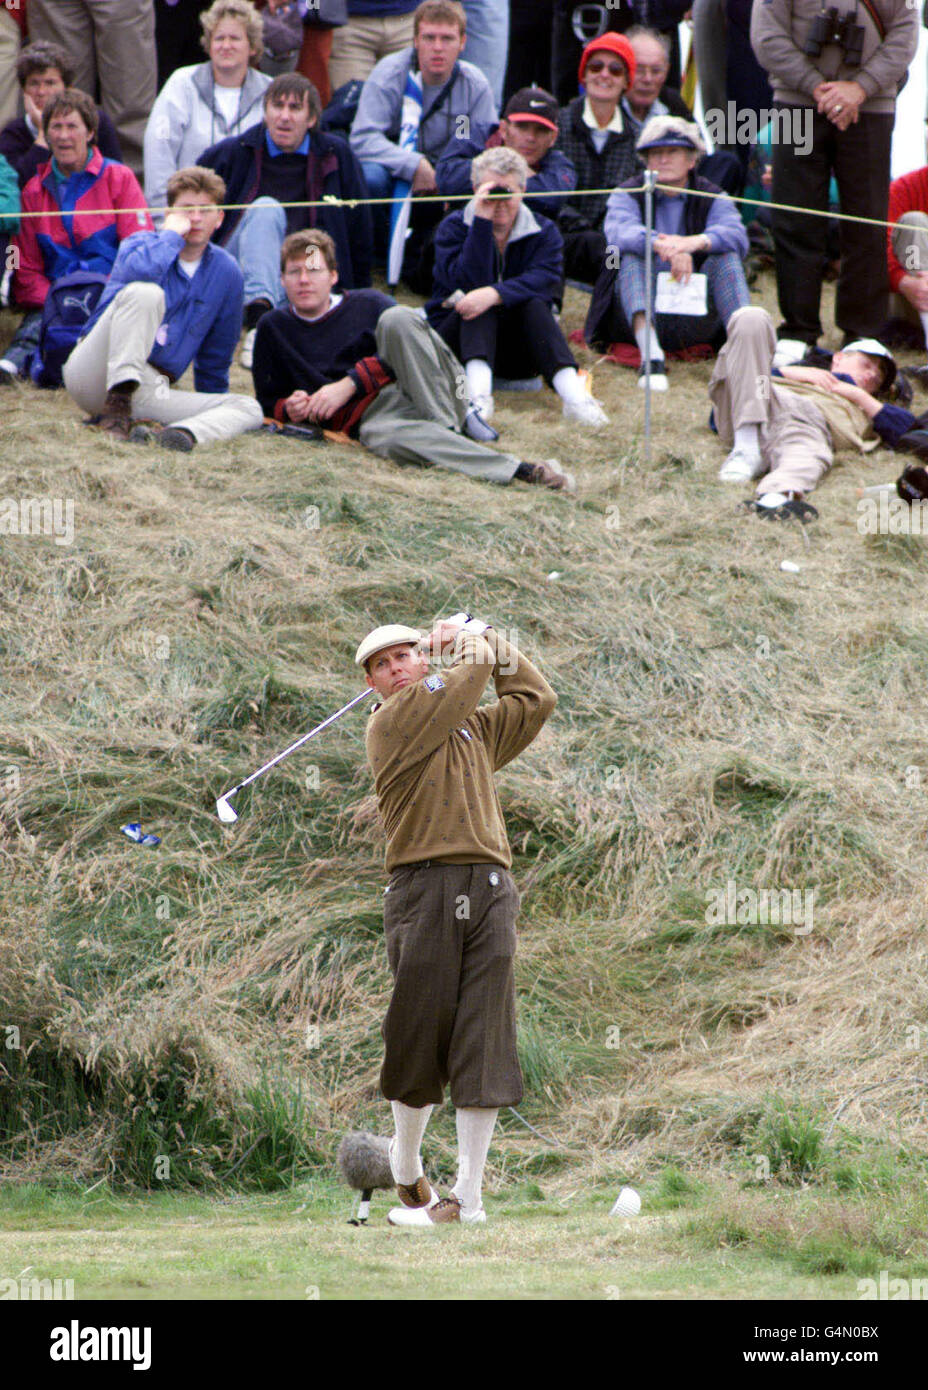 America's Payne Stewart, dressed in a pair of traditional plus fours, plays a shot from the light rough on the 5th hole, during the second day of the 1999 British Open Golf Championship at Carnoustie, Scotland. Stock Photo